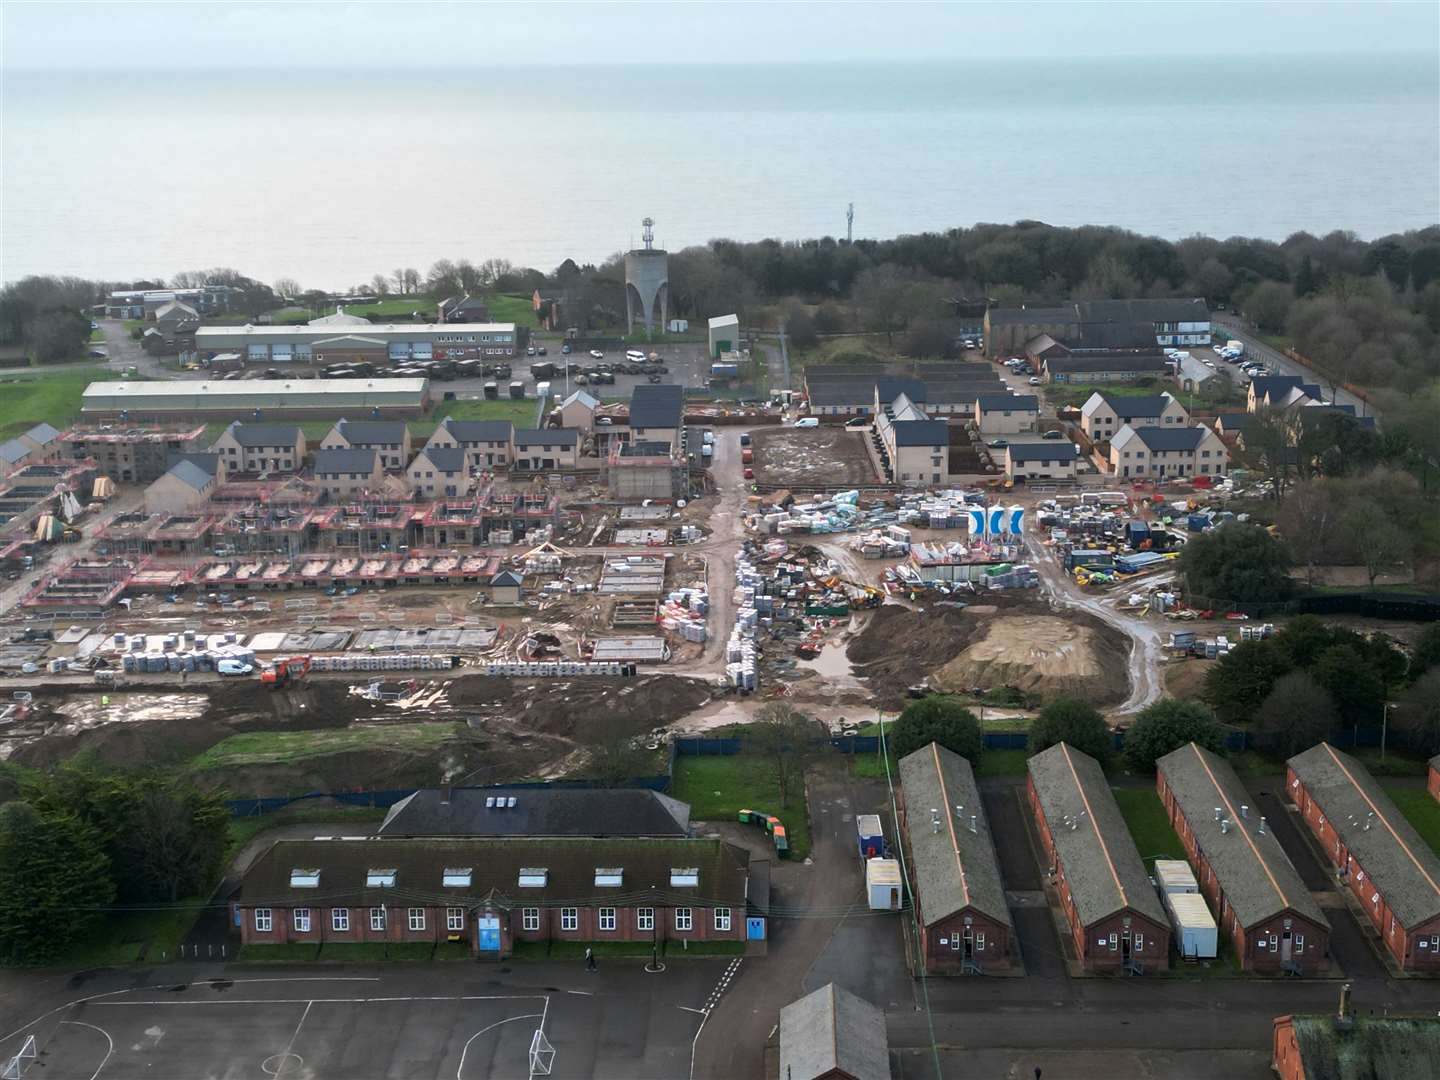 A closer look at the new Burgoyne Square being built on the site of Burgoyne Barracks in Cheriton, Folkestone. Picture: Barry Goodwin